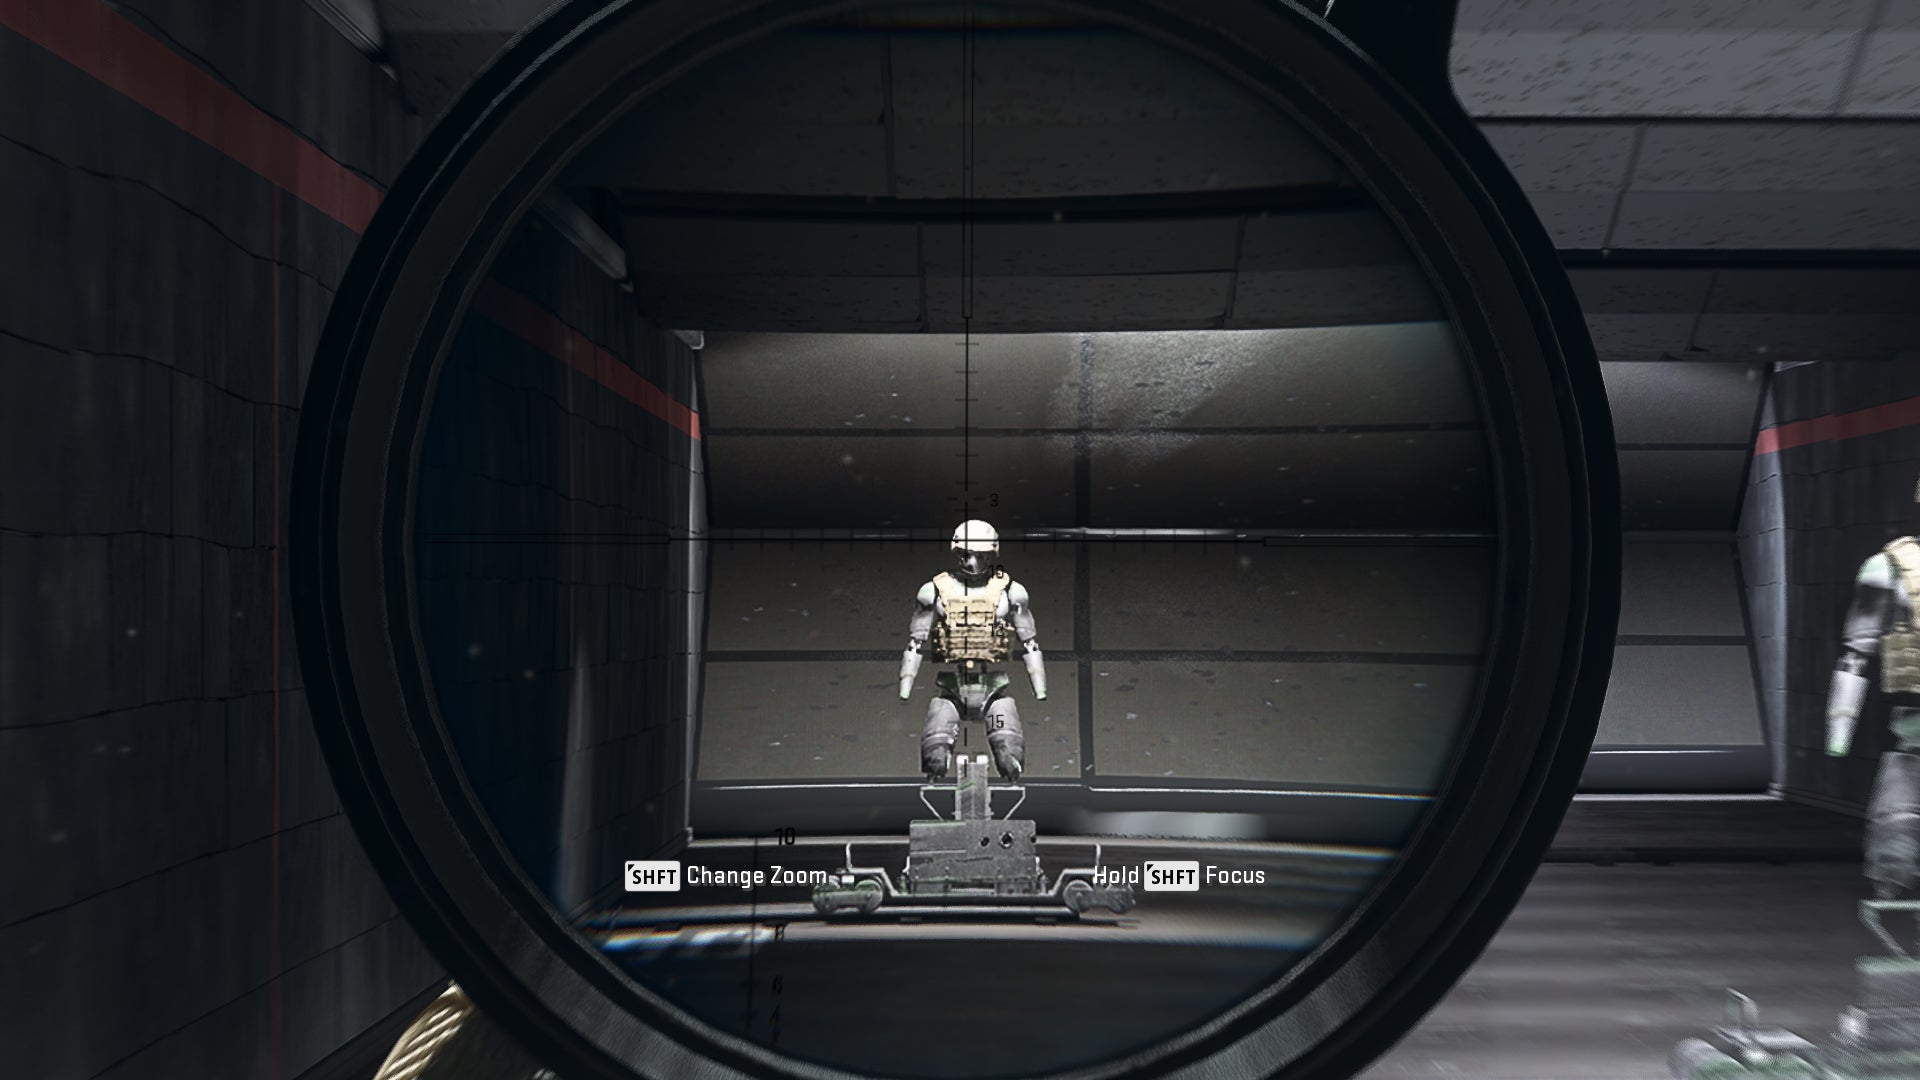 The player in Warzone 2.0 aims at a training dummy using the Corio 13x VRS optic attachment.